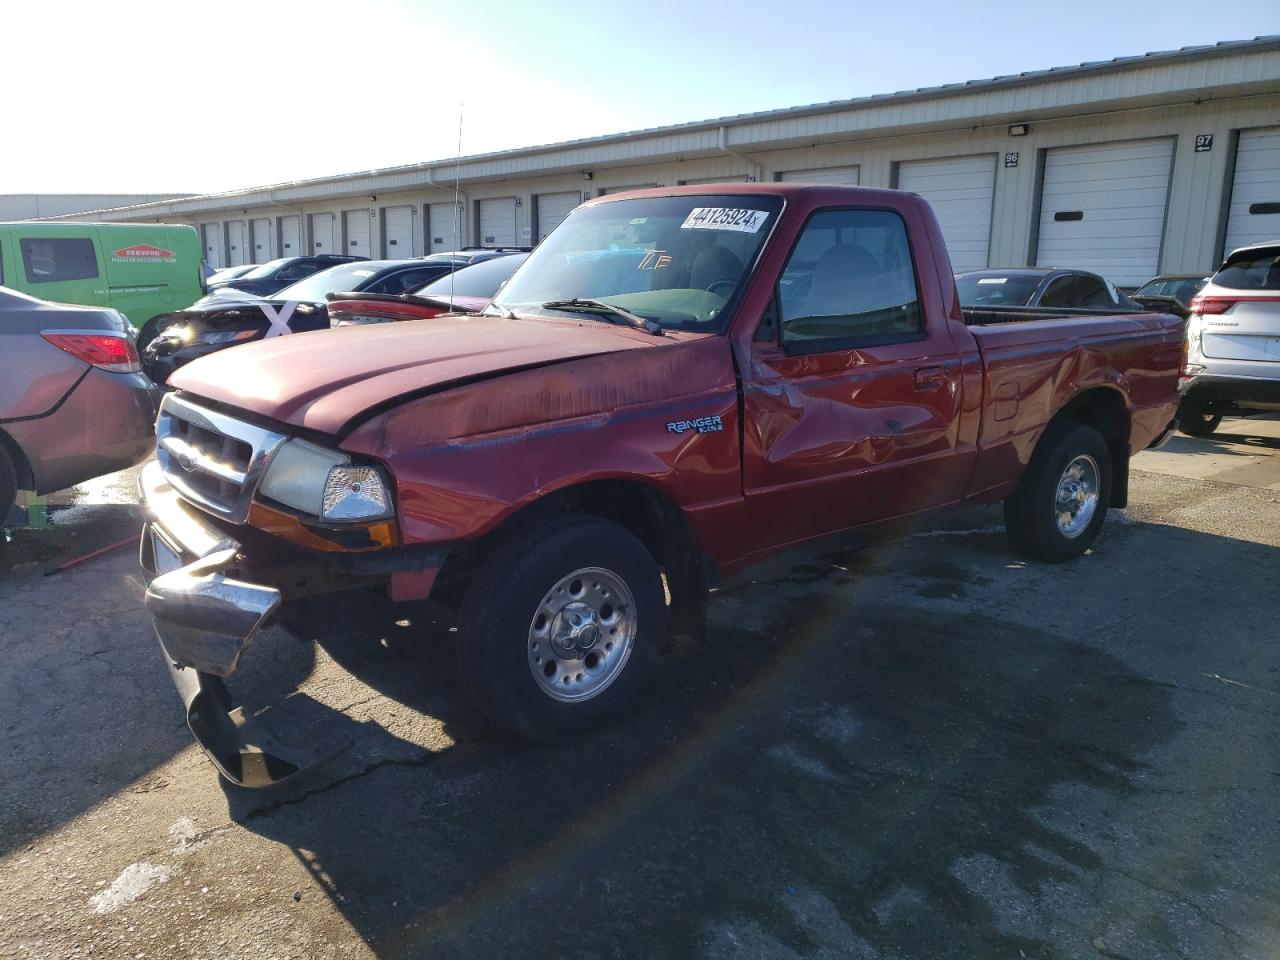 vin: 1FTYR10C1WUC03036 1FTYR10C1WUC03036 1998 ford ranger 2500 for Sale in 40272 2985, Ky - Louisville, Louisville, USA